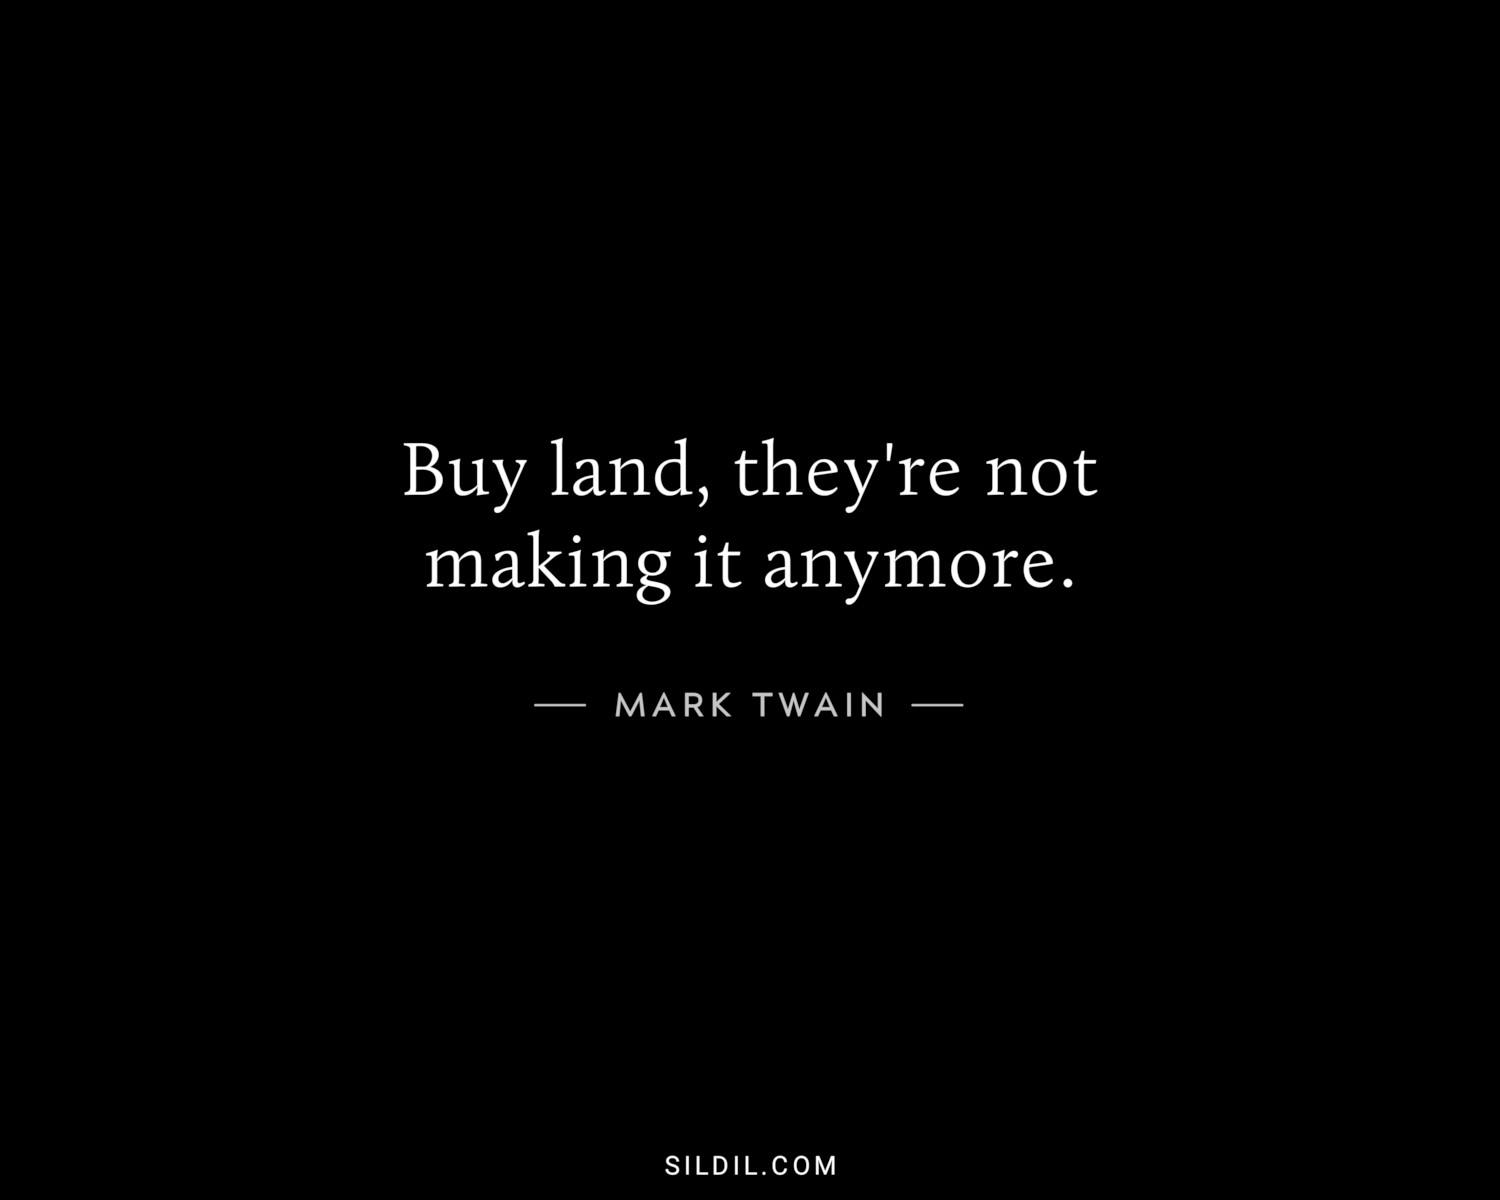 Buy land, they're not making it anymore.